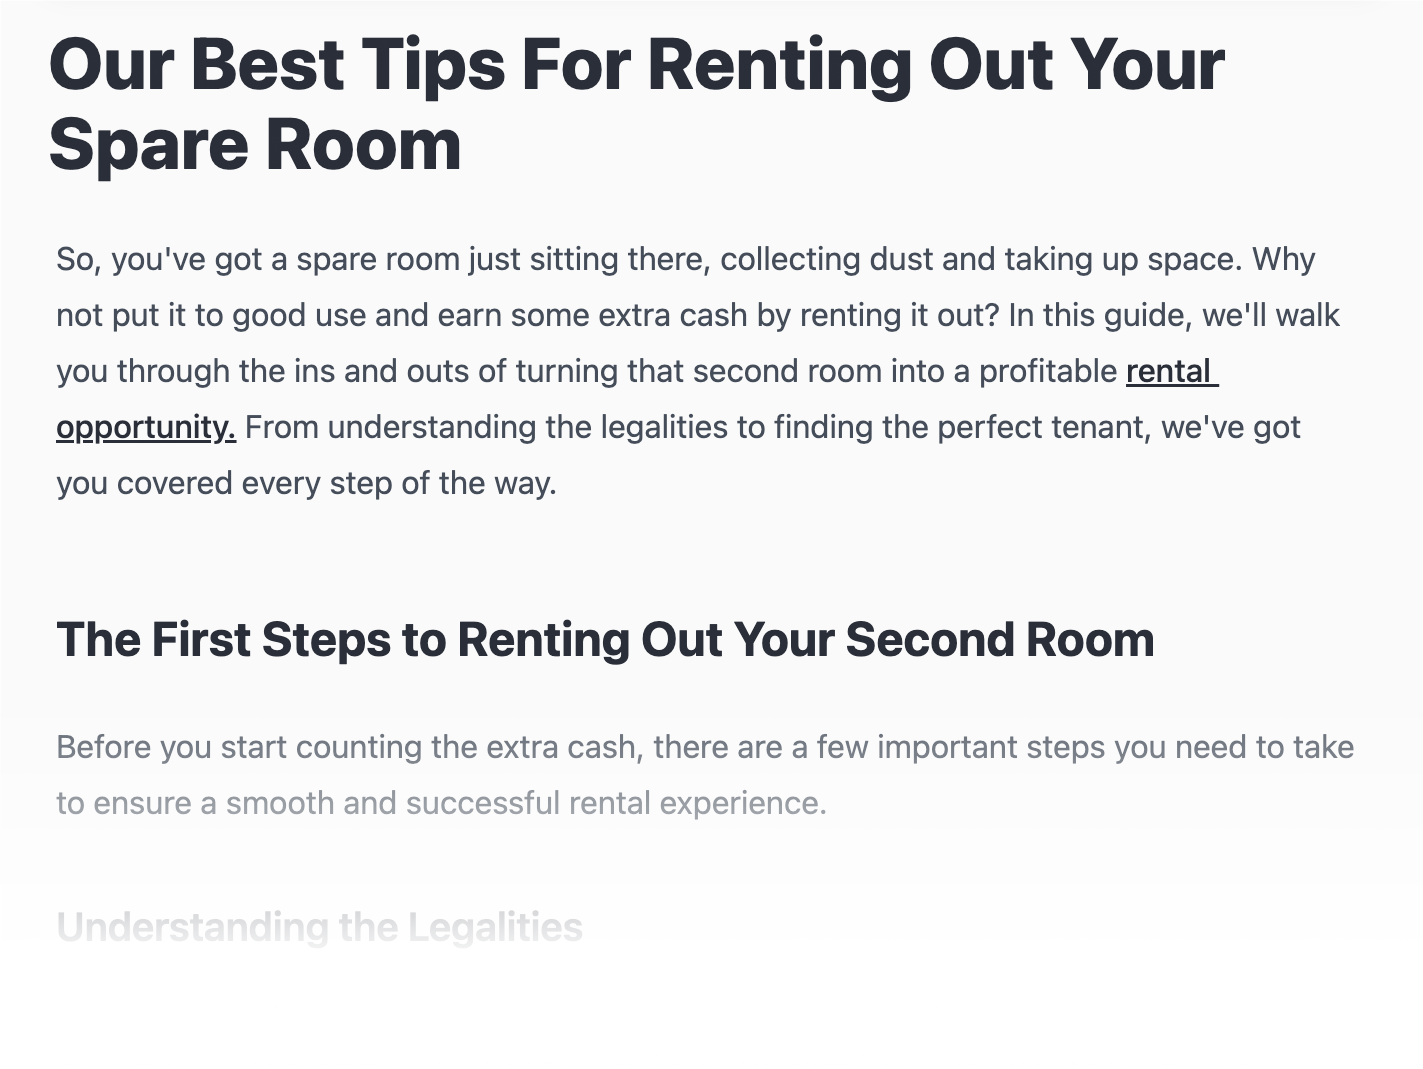 An article generated by Endless titled 'Our Best Tips For Renting Out Your Spare Room'